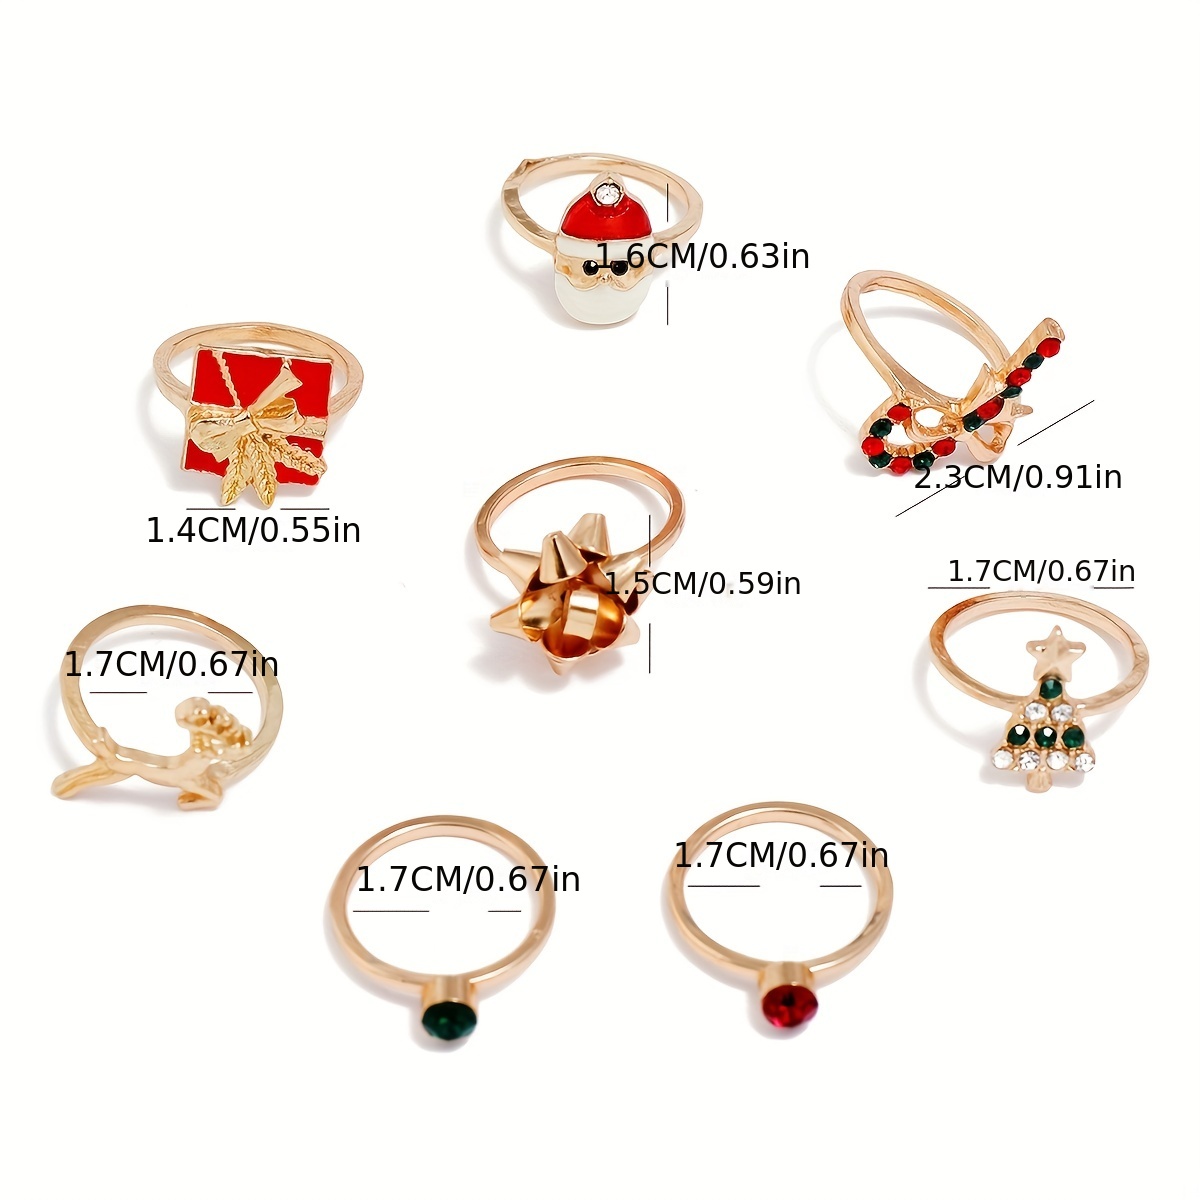 Latest Designs Of Gold Rings For Womens